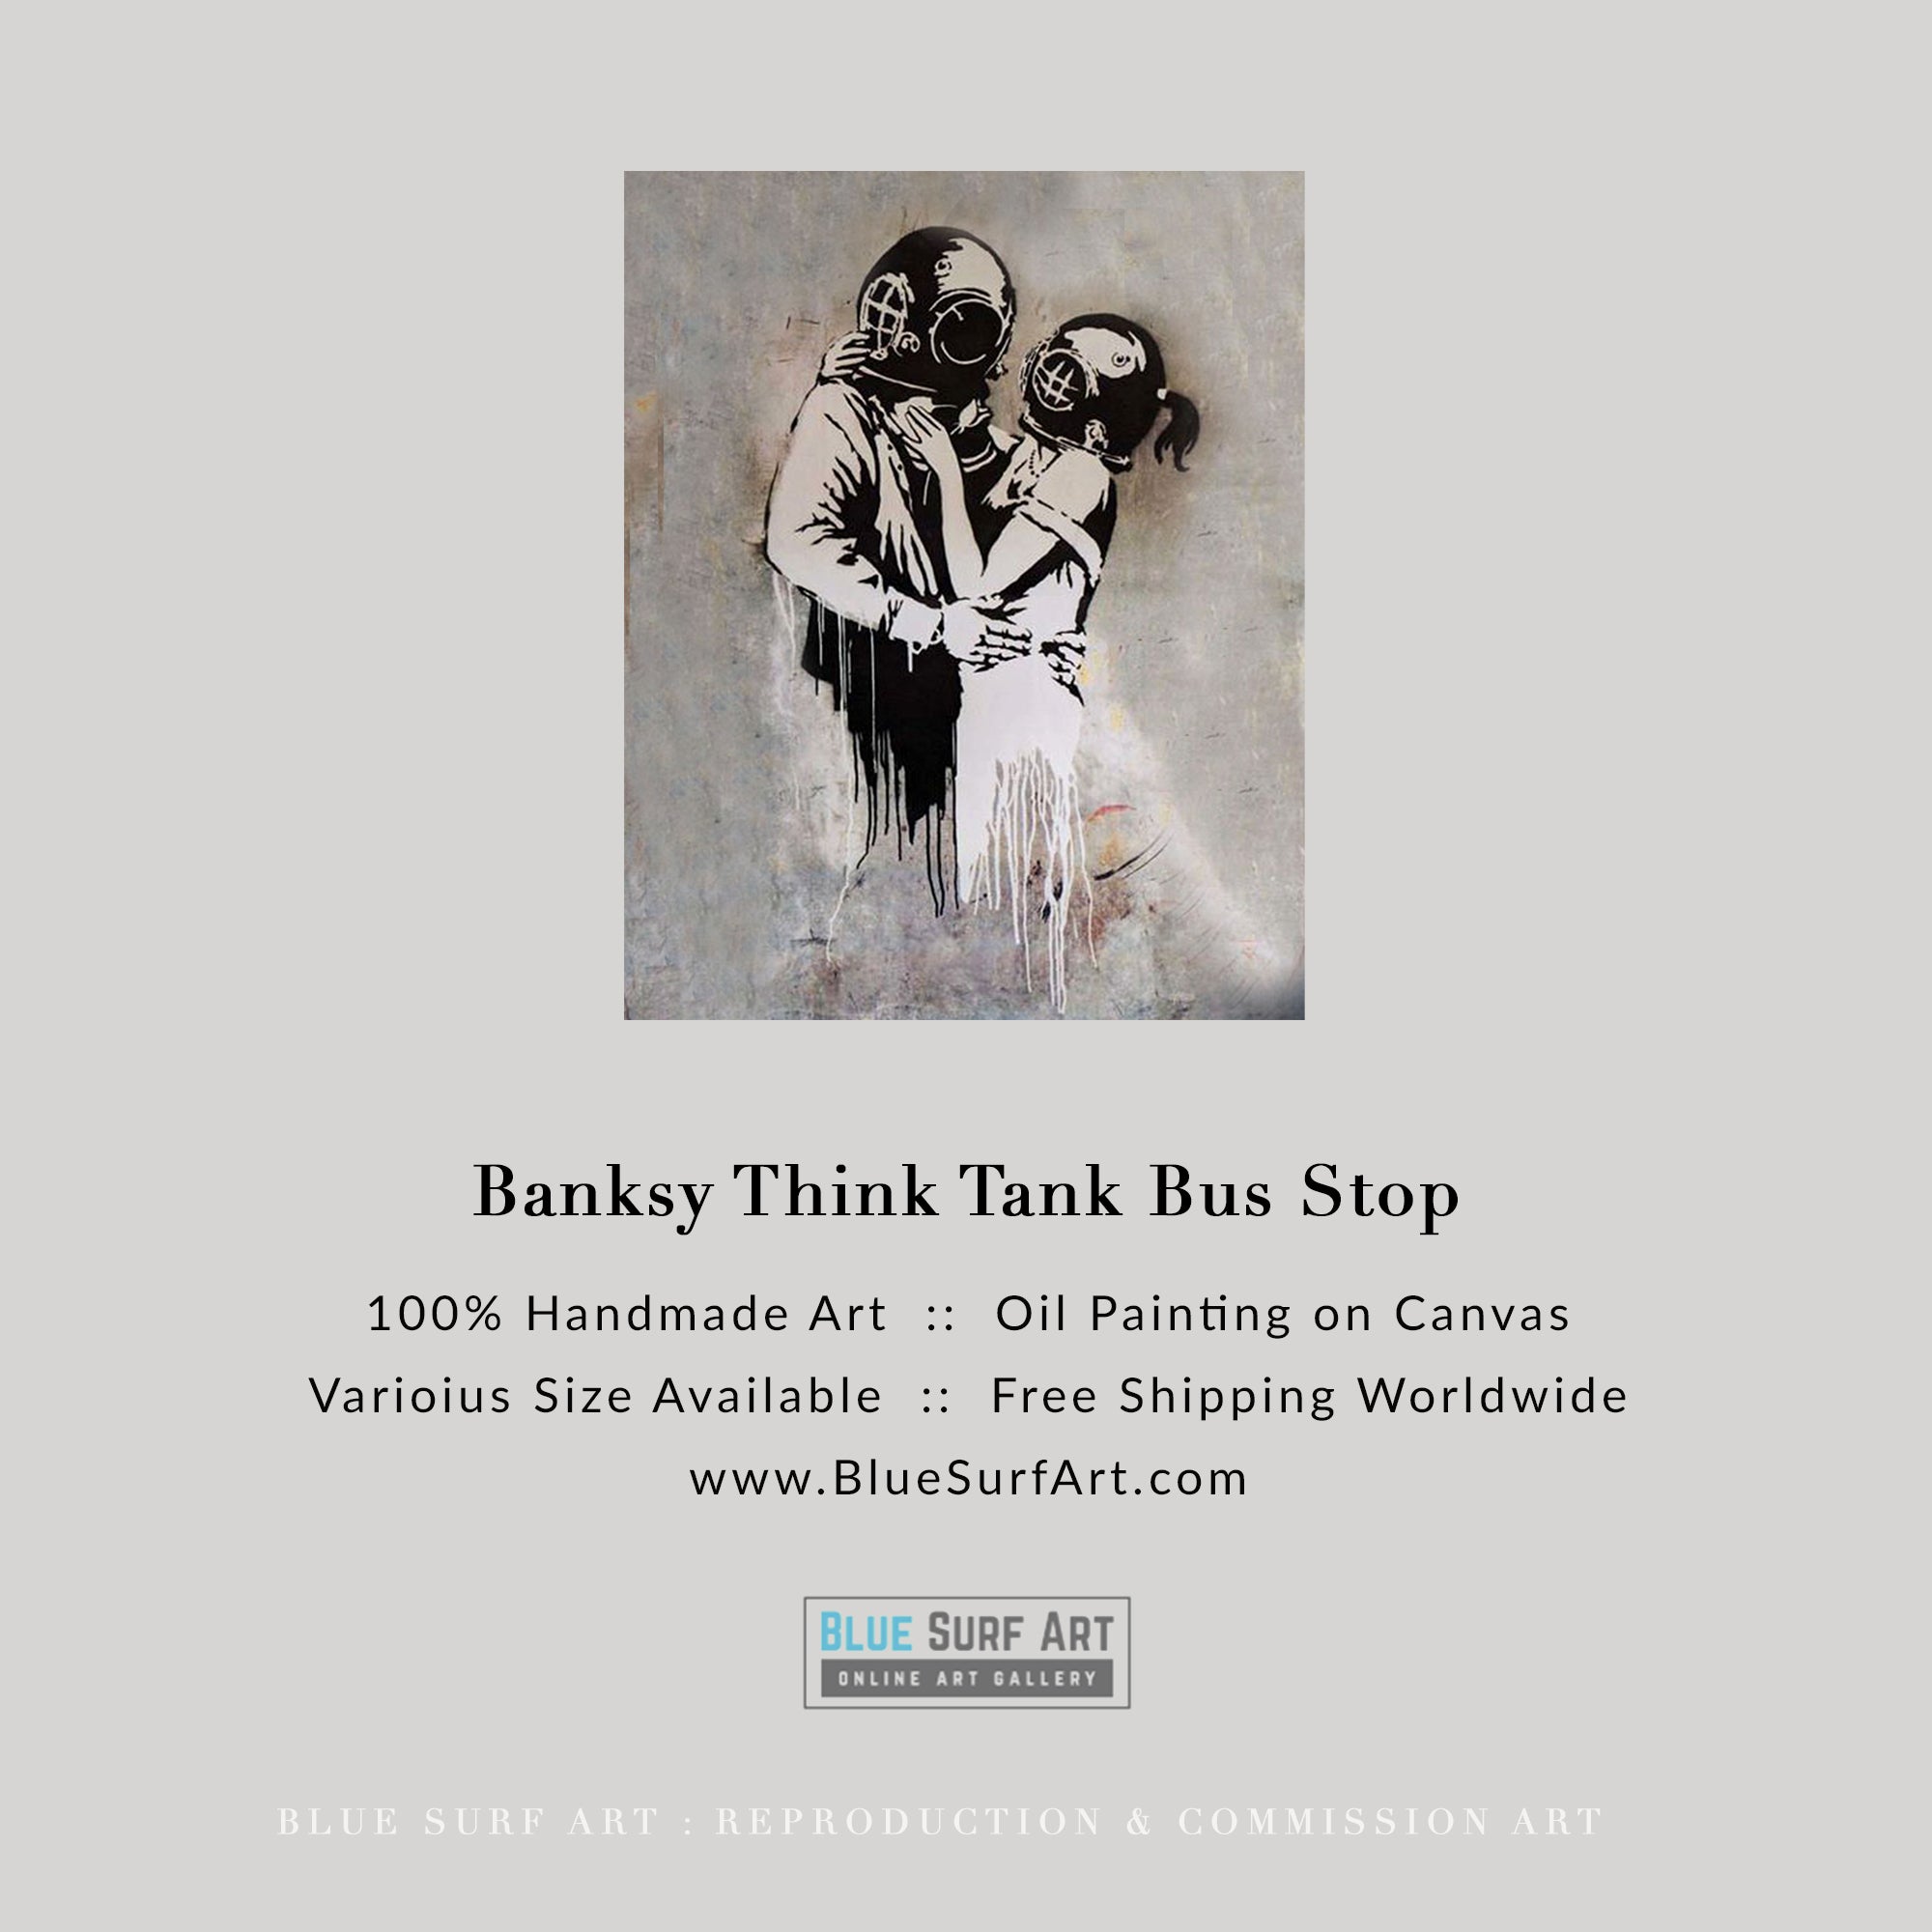 Think Tank Bus Stop Banksy Art Handmade Oil on Canvas, Made to 